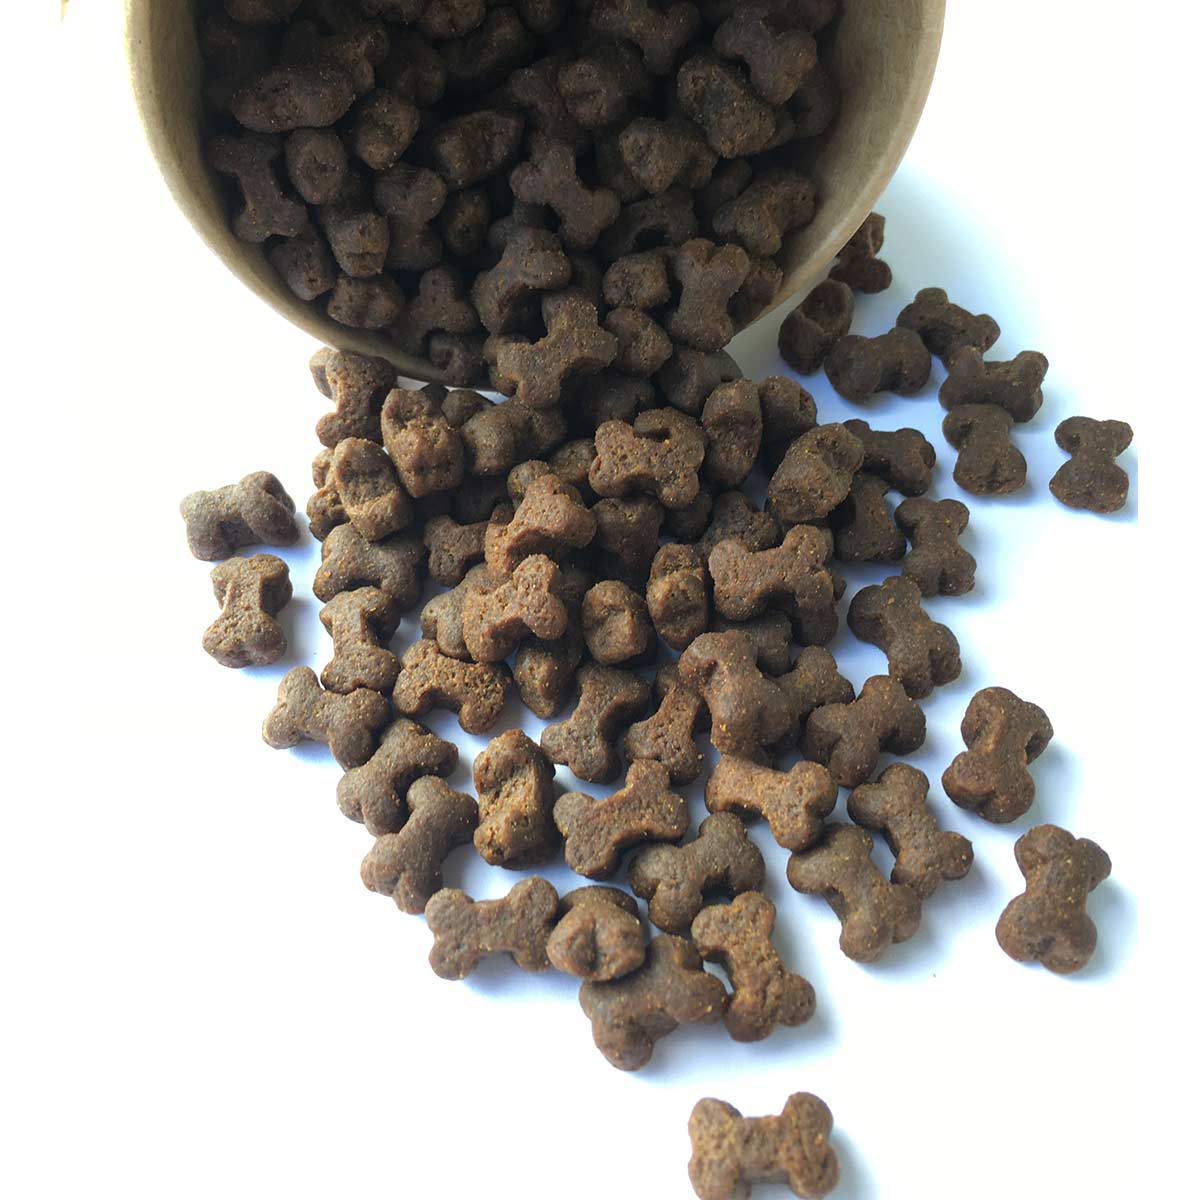 Natural Choice Grain Free 80% Poultry Dog Treats